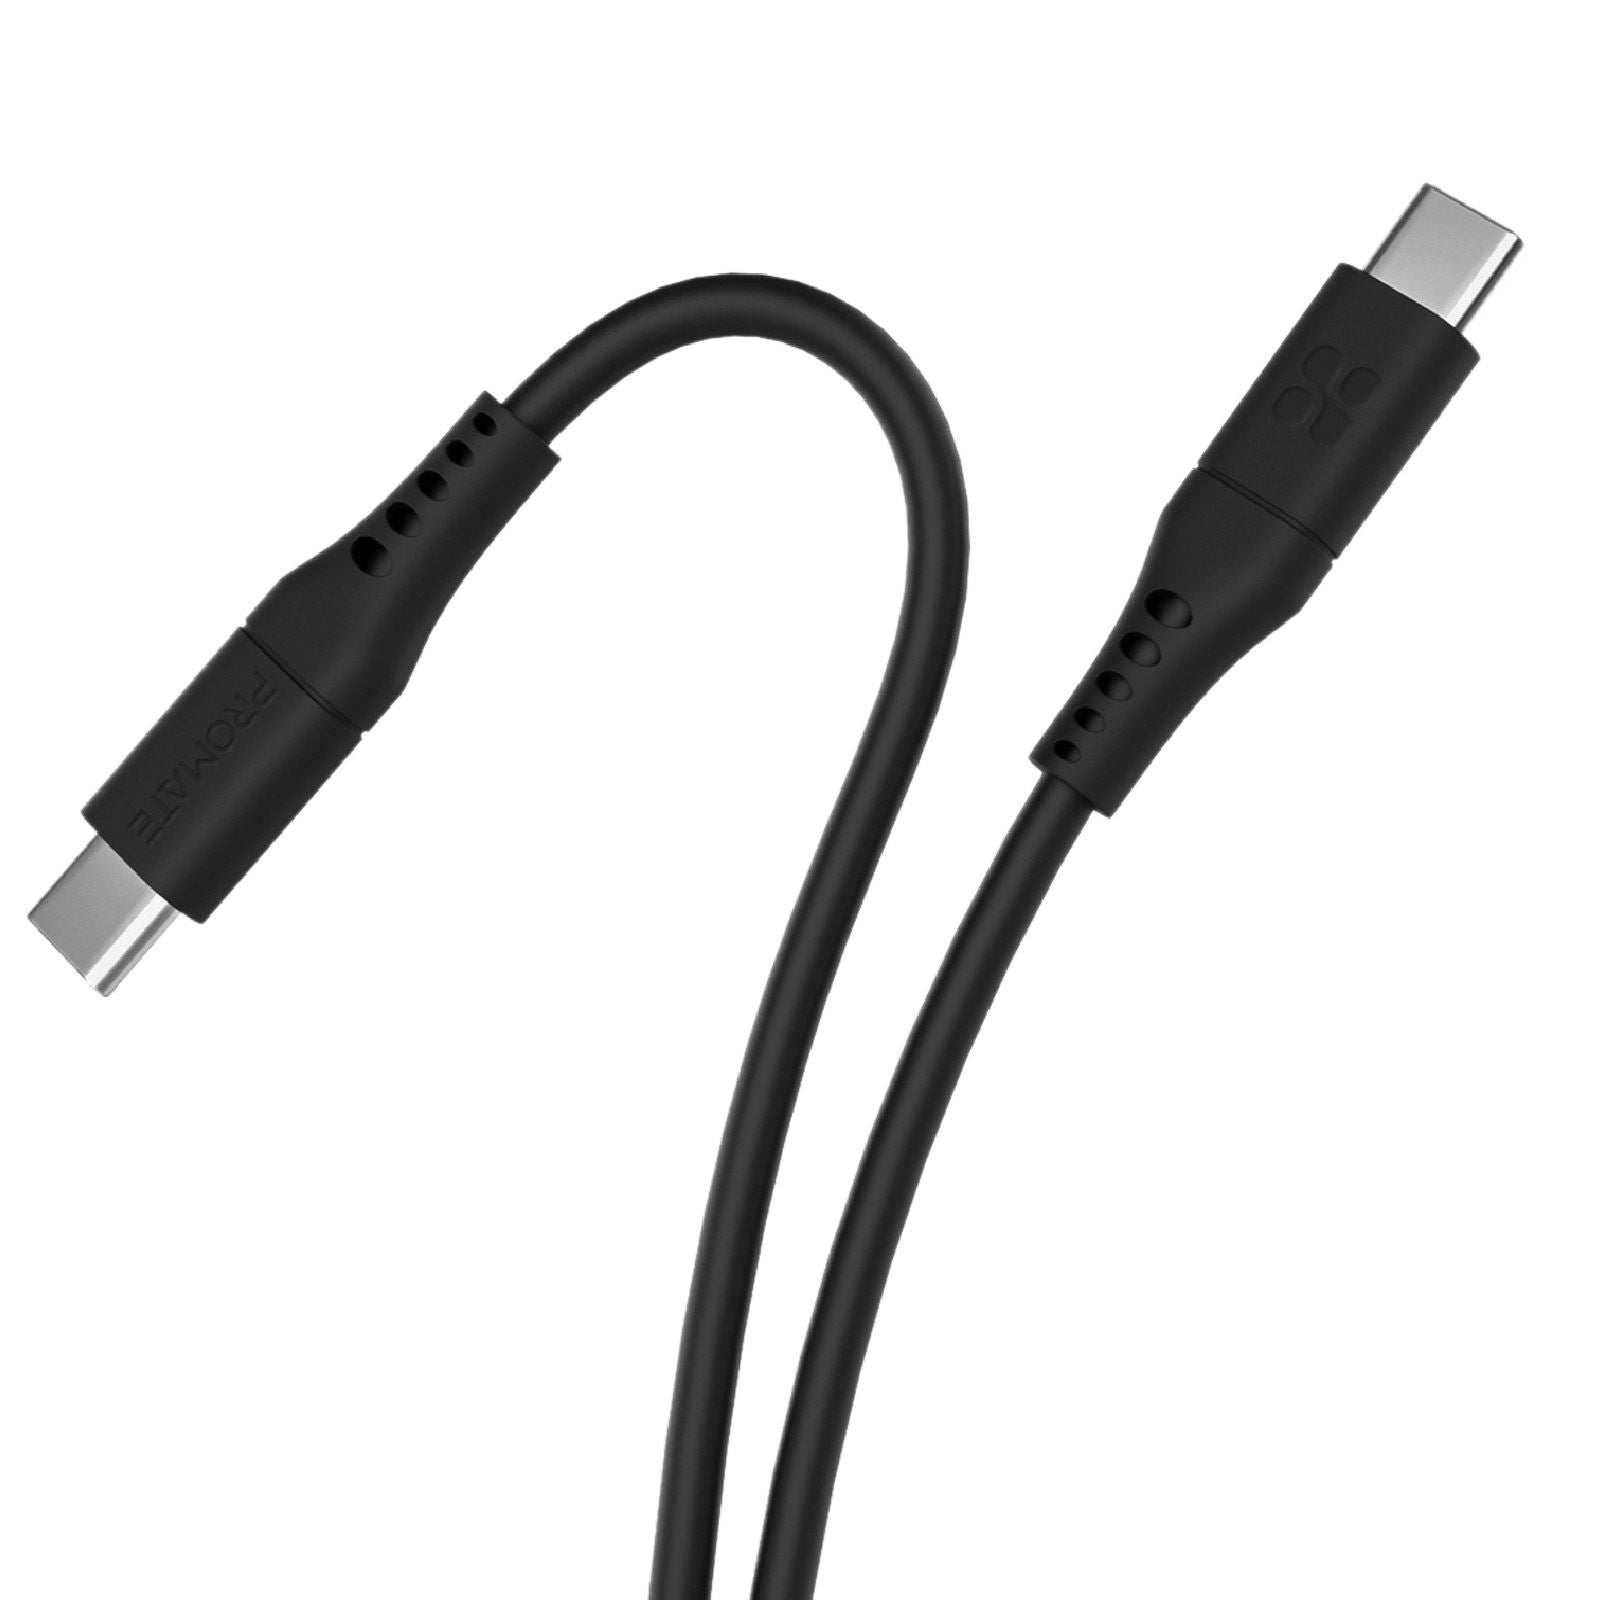 PROMATE_2m_USB-C_Data_and_Charging_Cable._Data_Transfer_Rate_480Mbps._60W_Power_Delivery._Durable_Soft_Silicon_Cable._Tangle_Resistant._25000+_Bend_Tested._Black 1664